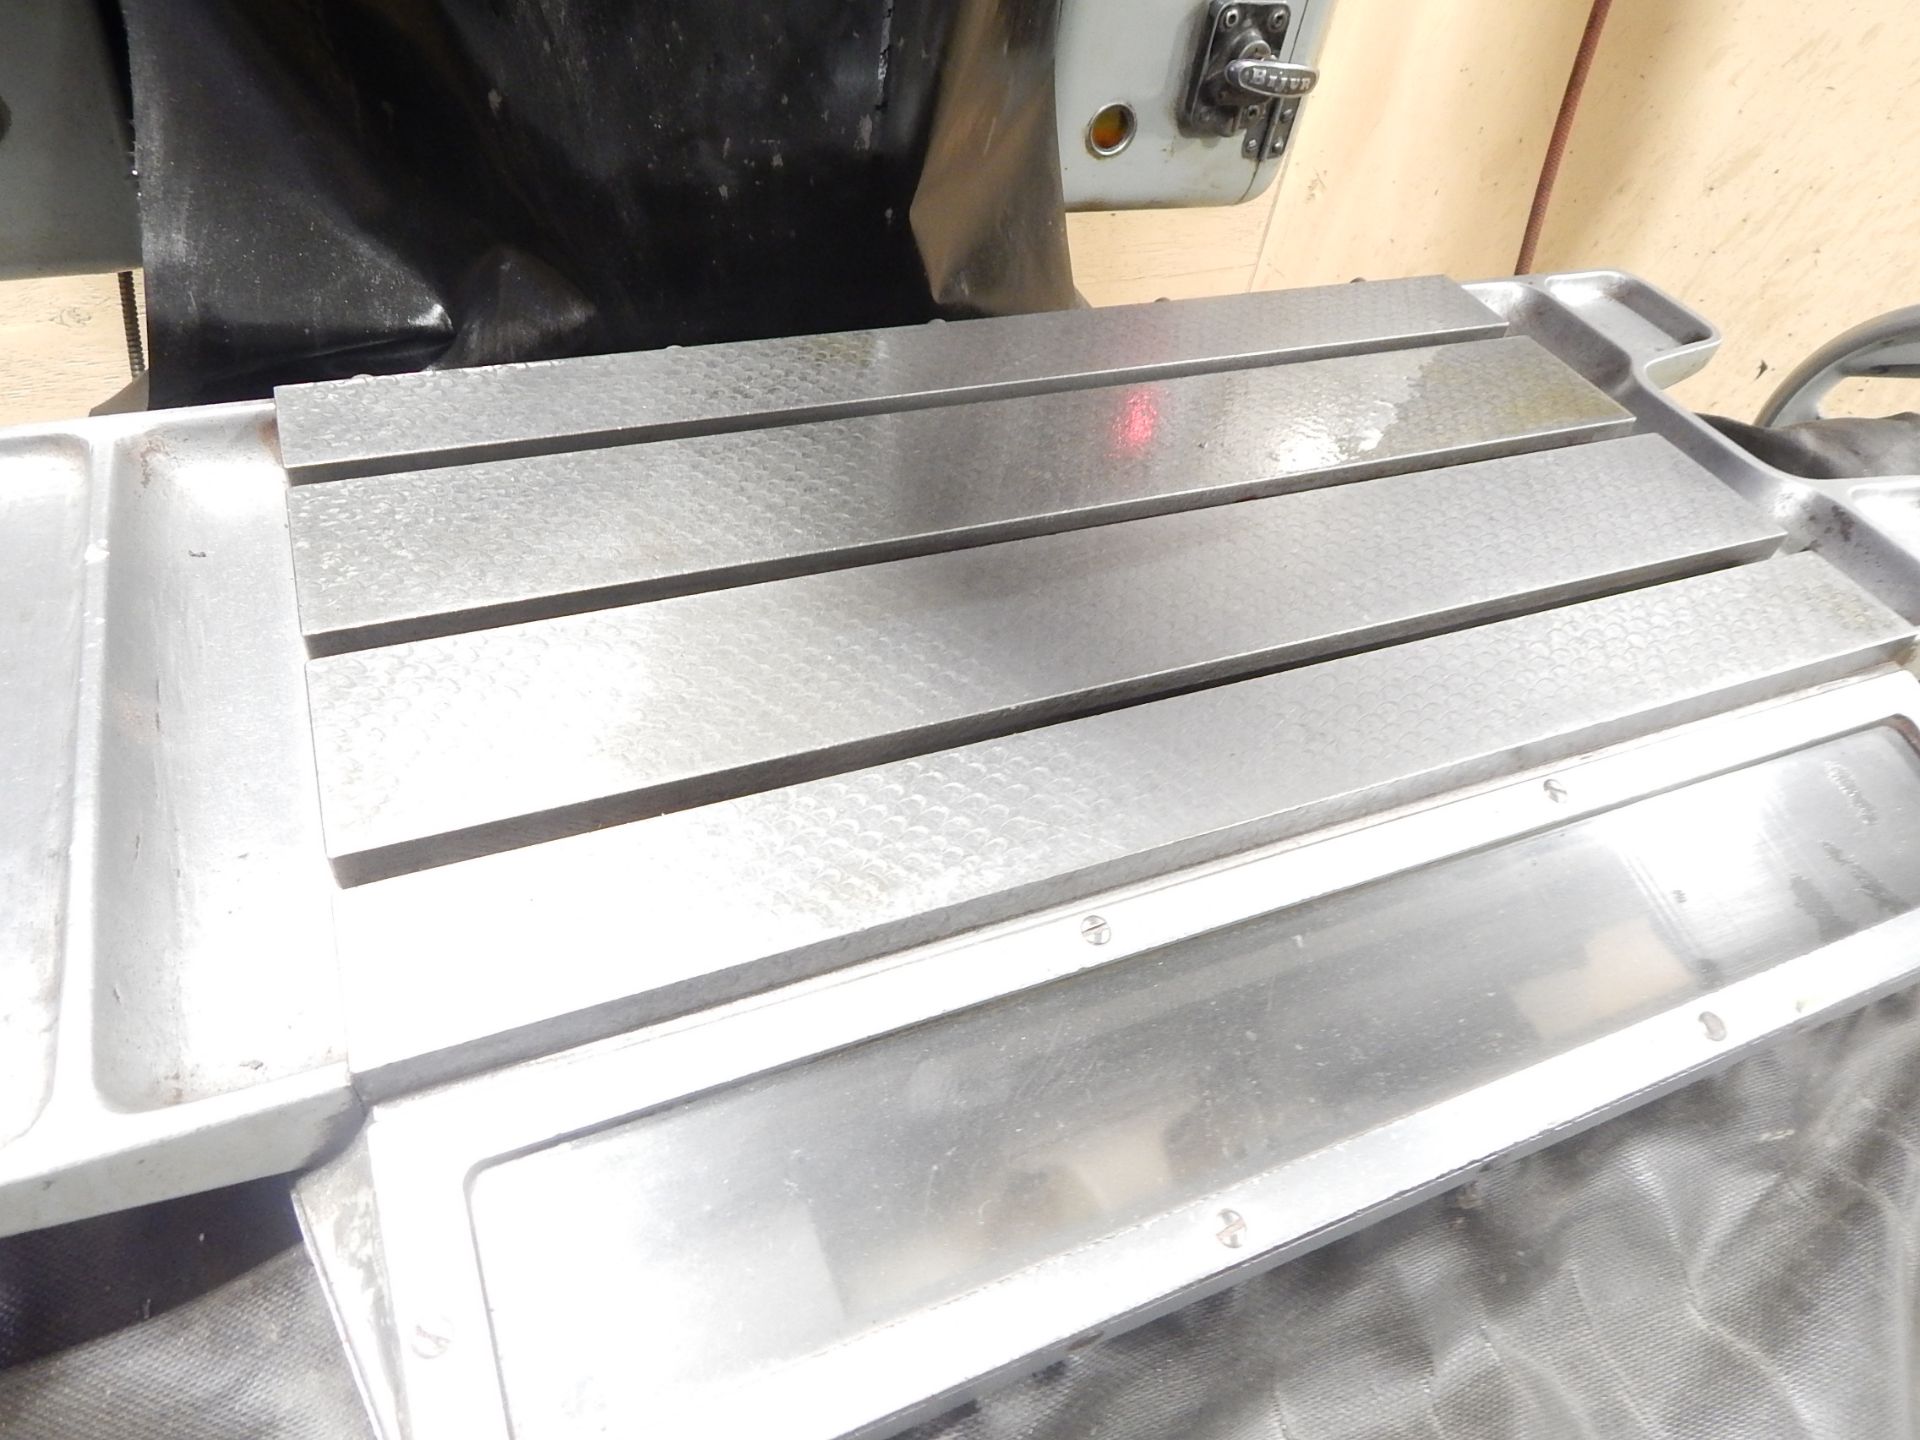 Moore Jig Grinder No. 2, SN 7561, Sony LH31A DRO, Table Size, 10" x 19", Moore Grinding Spindle - Image 6 of 7